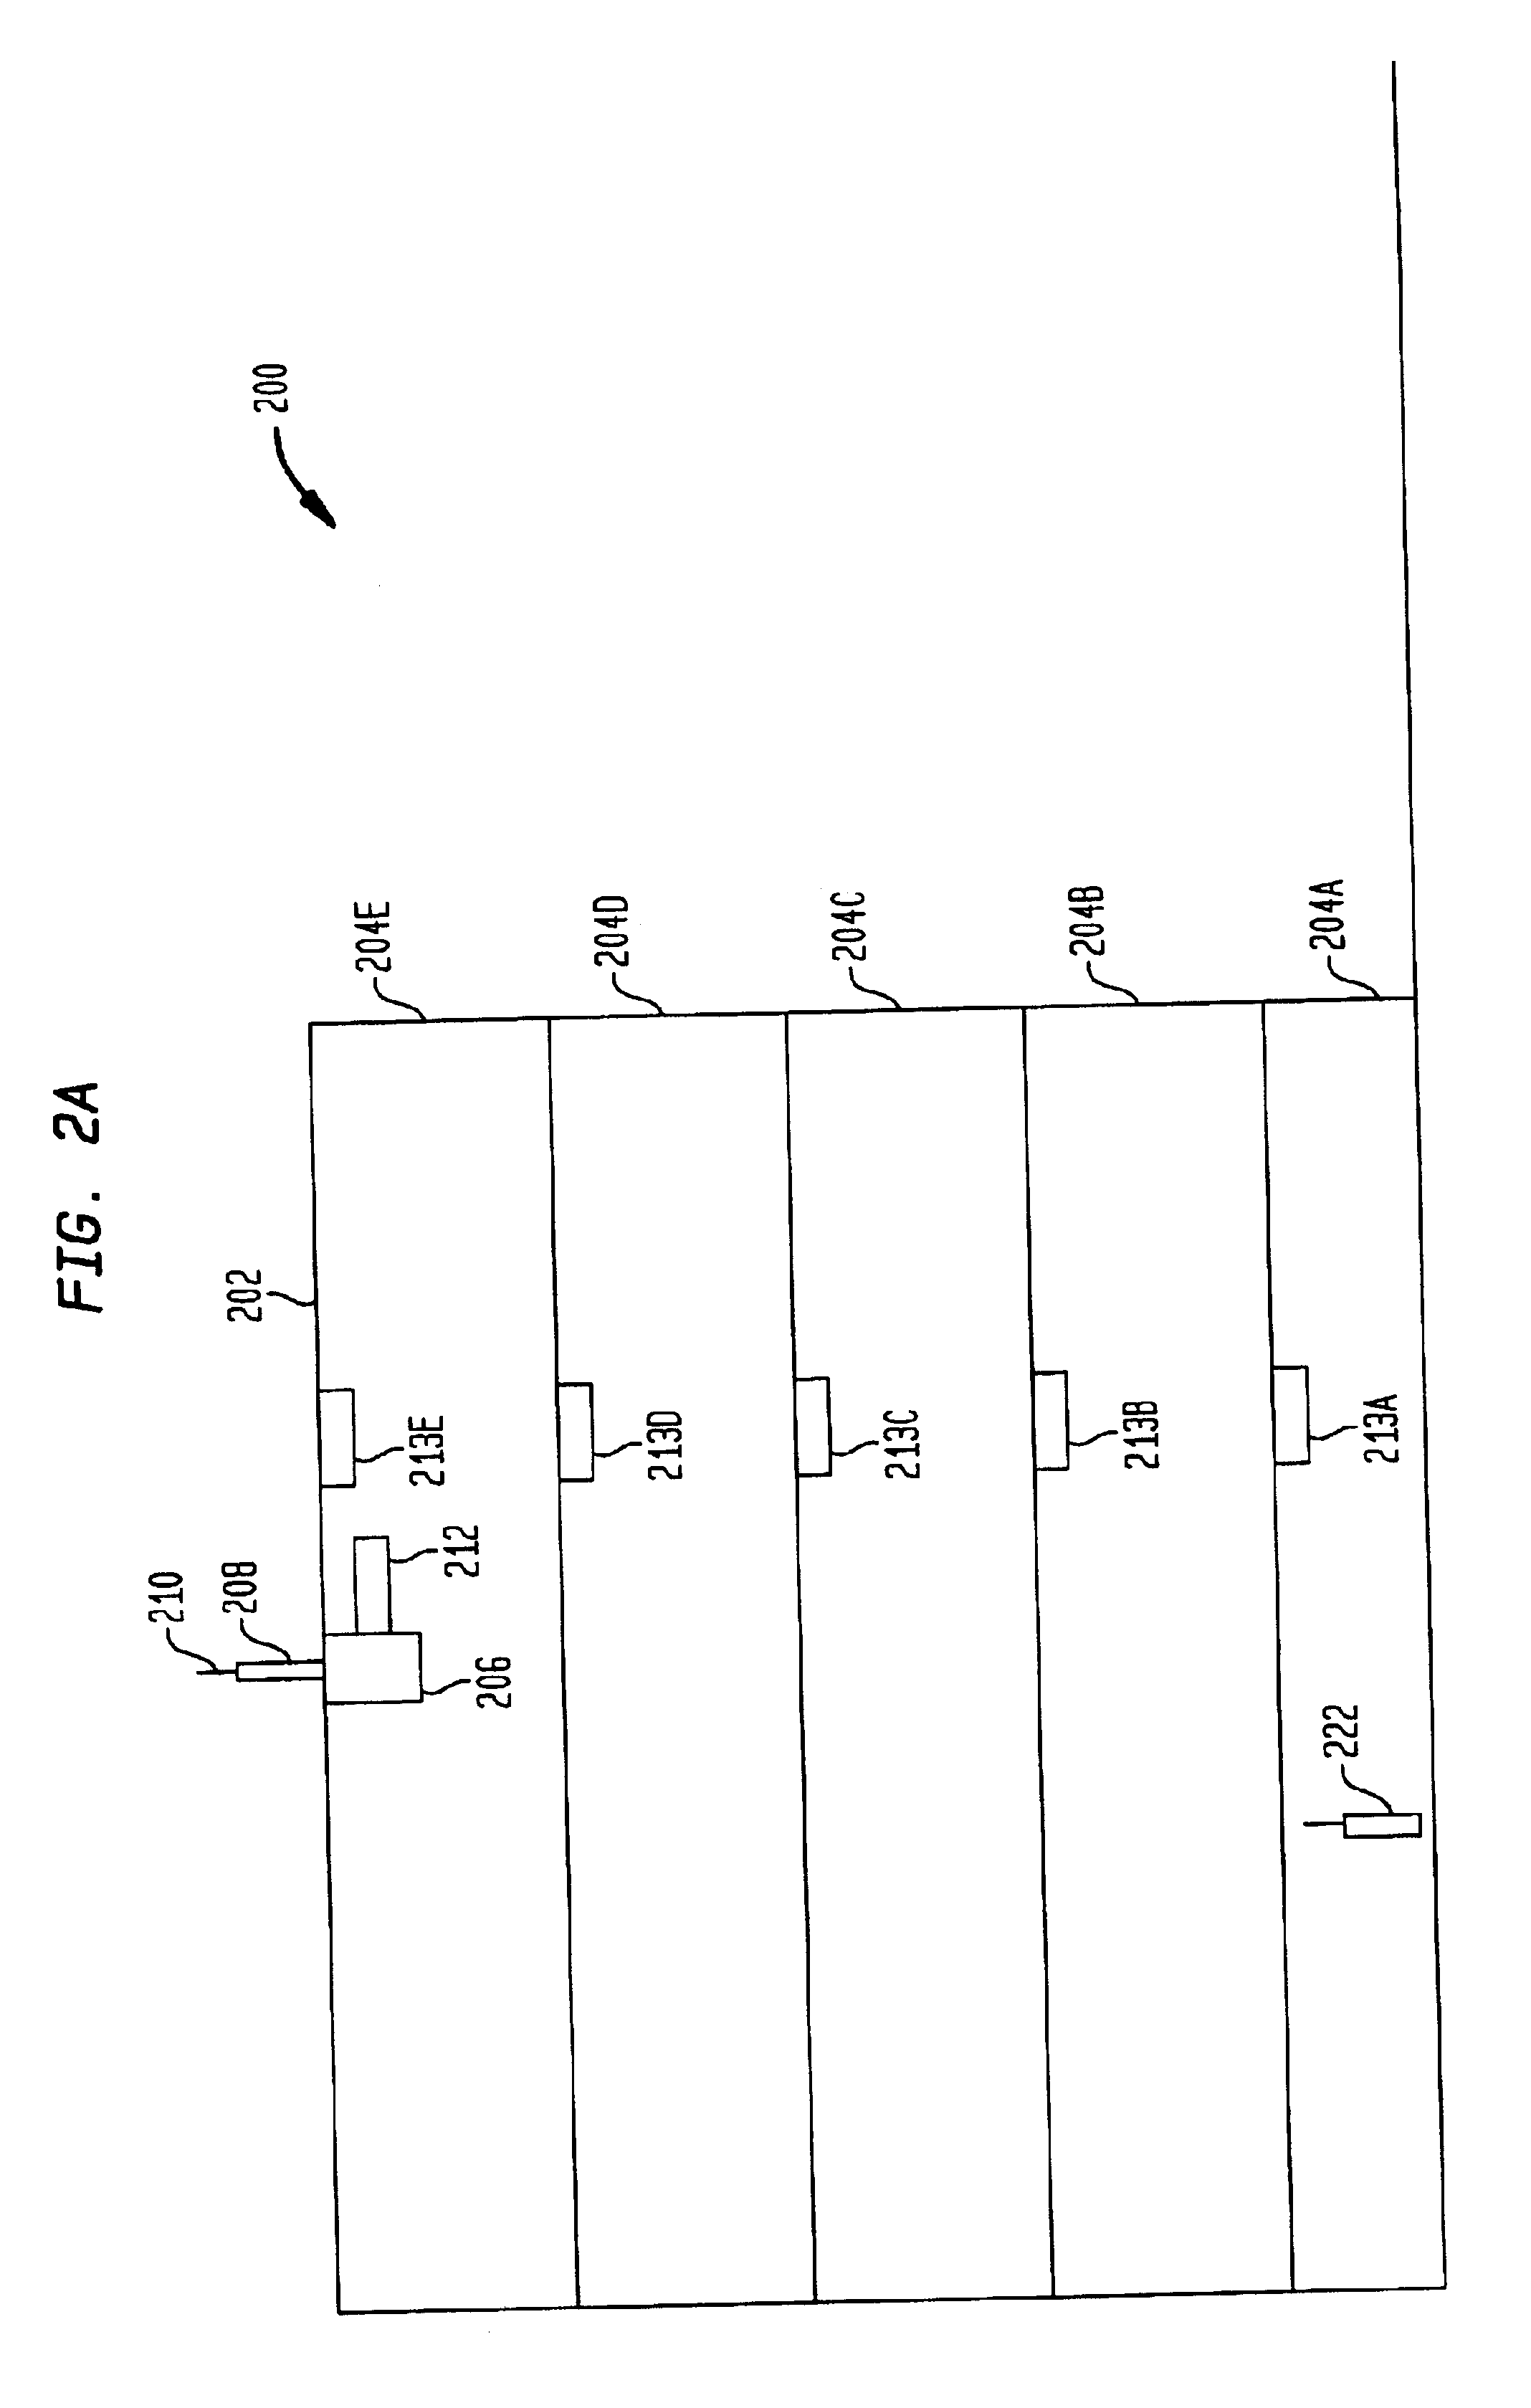 Methods and apparatus for location determination based on dispersed radio frequency tags